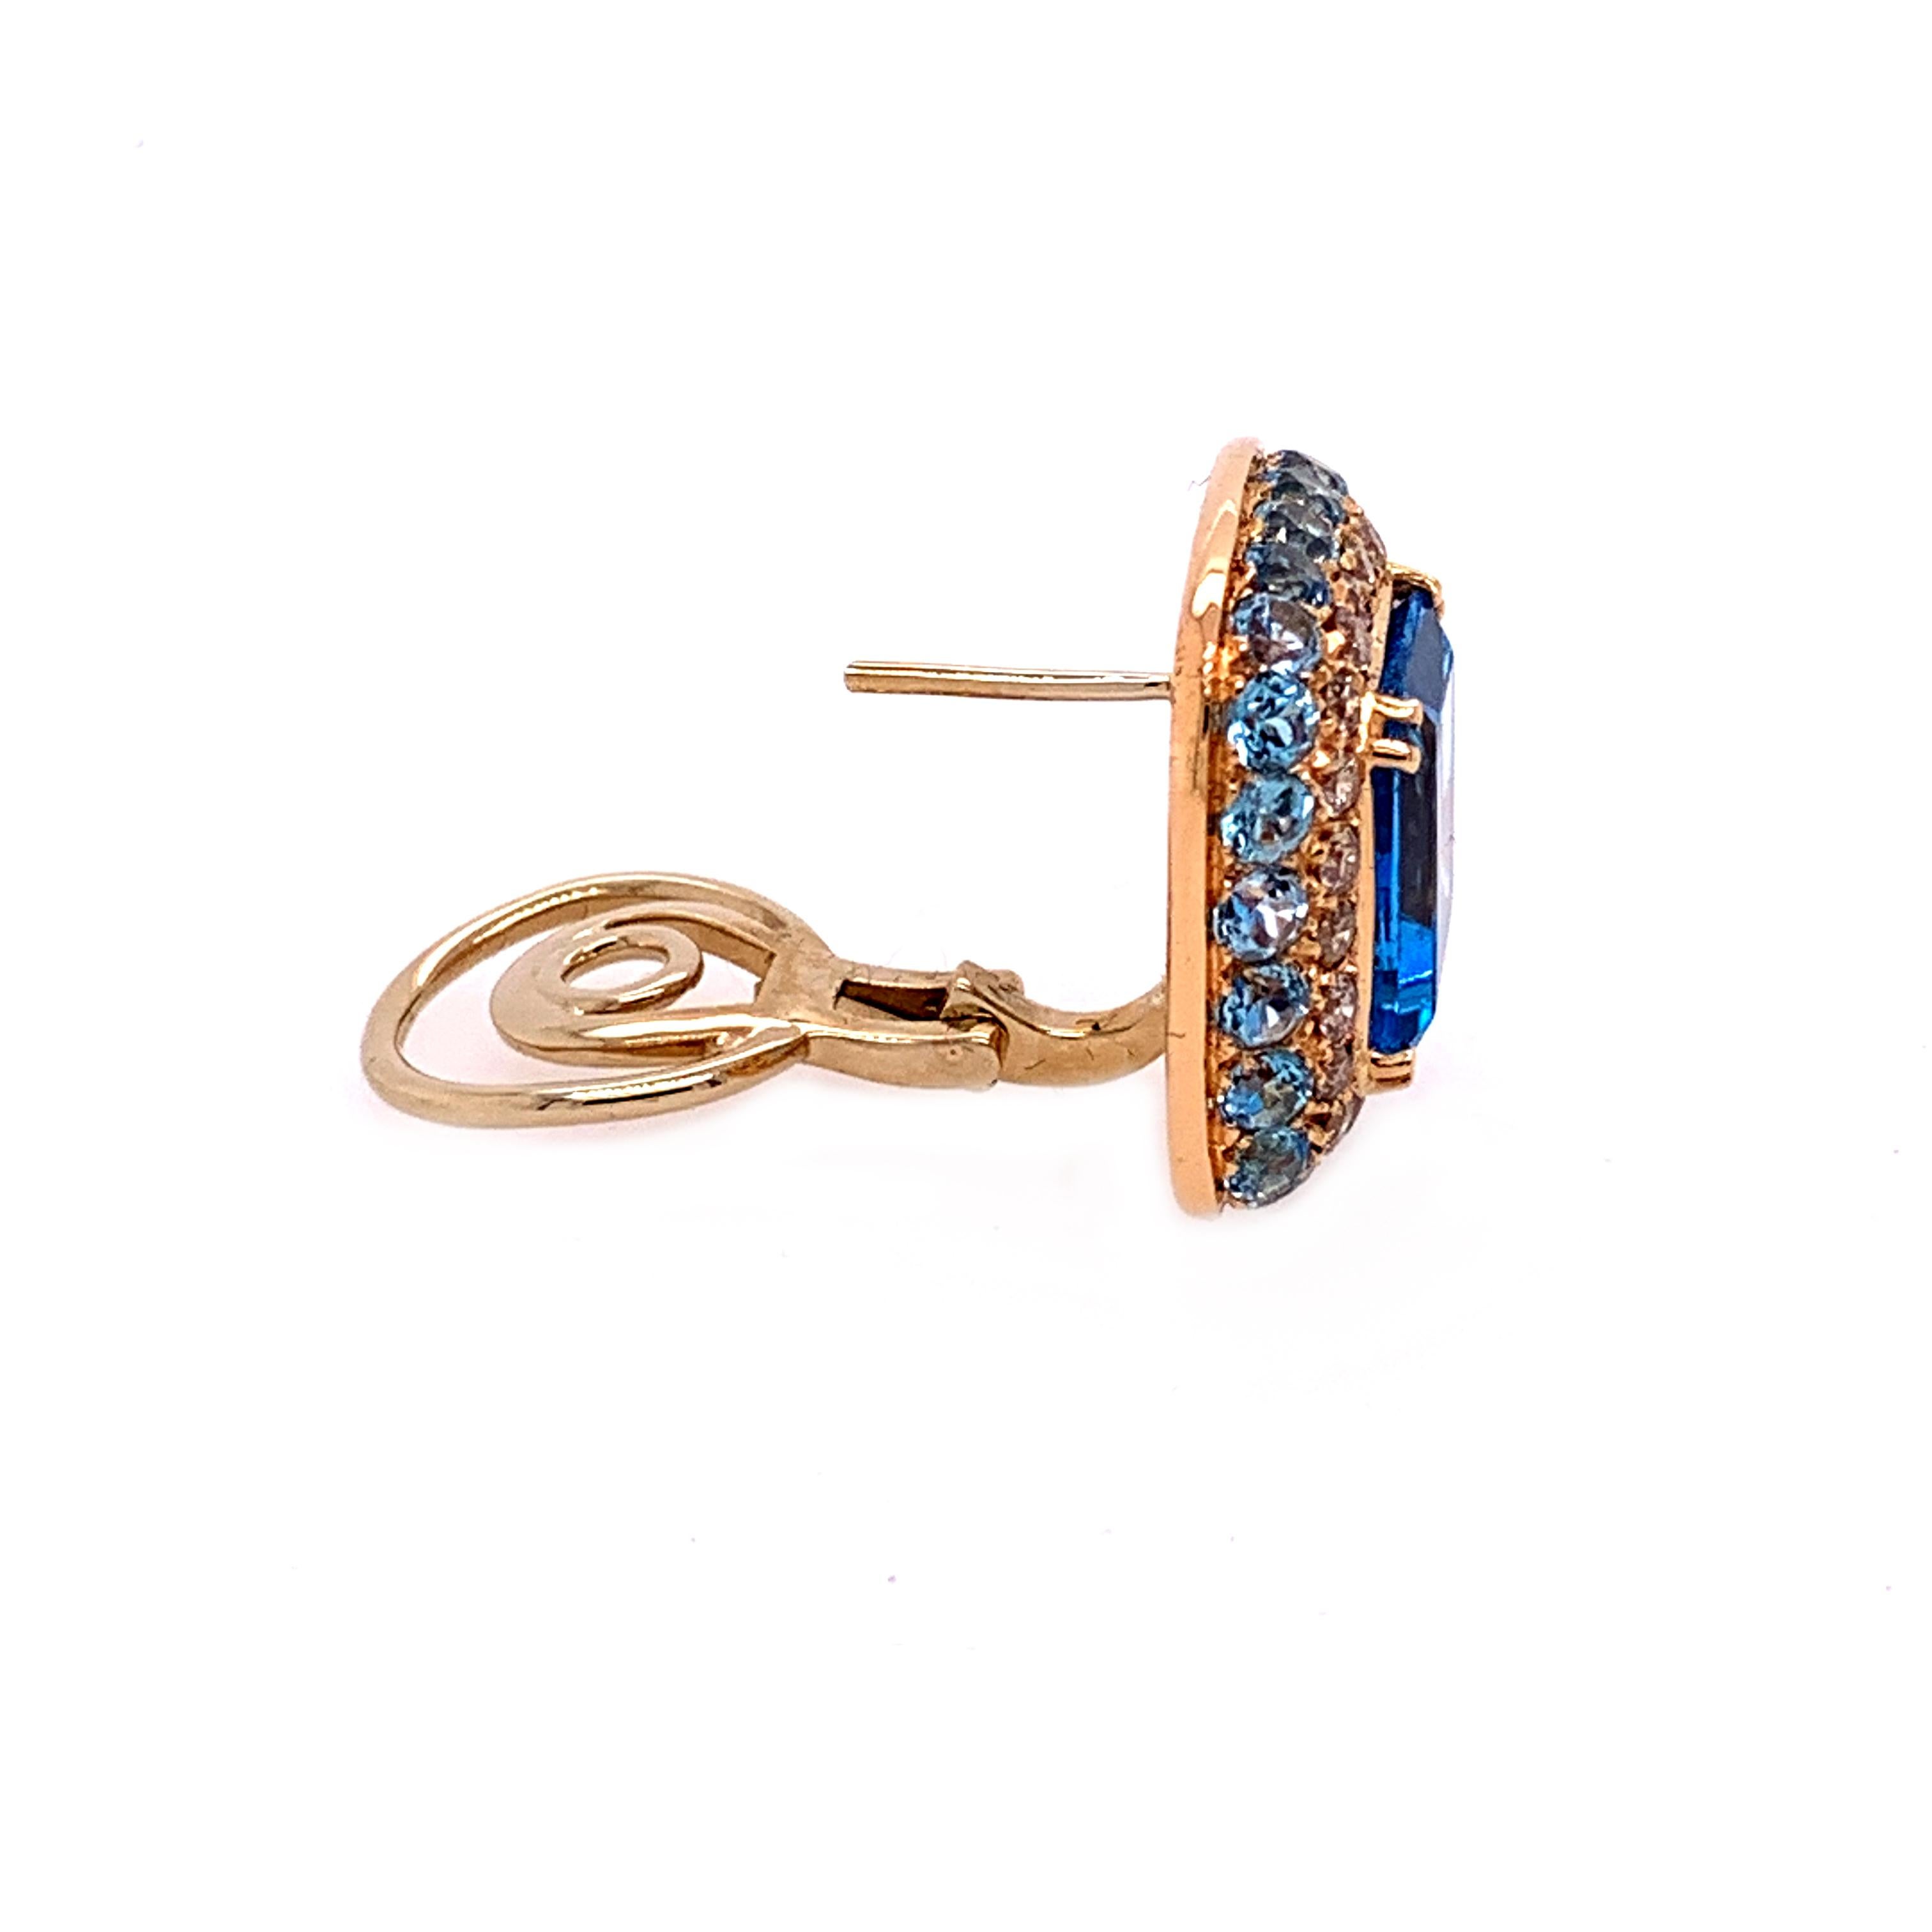 Contemporary 18 Karat Rose Gold Brown Diamonds and Blue Topaz Earrings